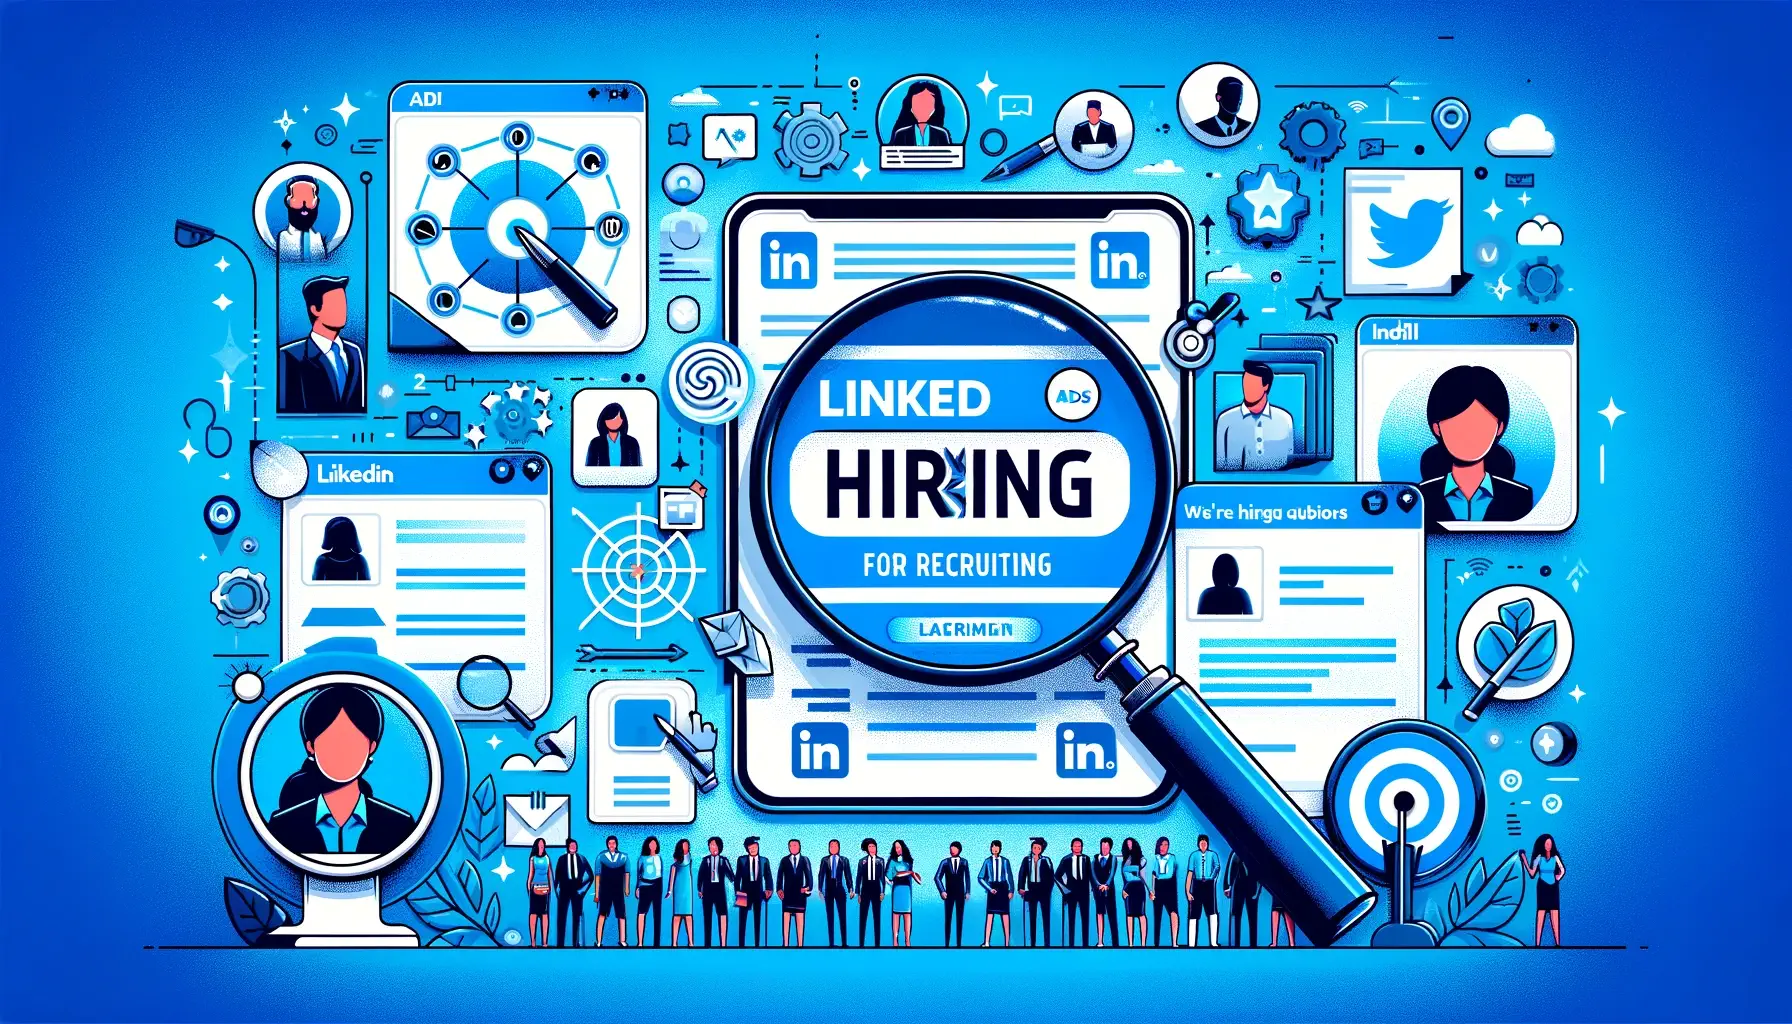 The design depicts the concept of using LinkedIn ads to attract top talent and fill job positions, featuring elements such as a magnifying glass over a pool of candidates, a 'We're Hiring' sign, and examples of LinkedIn ads for recruiting.